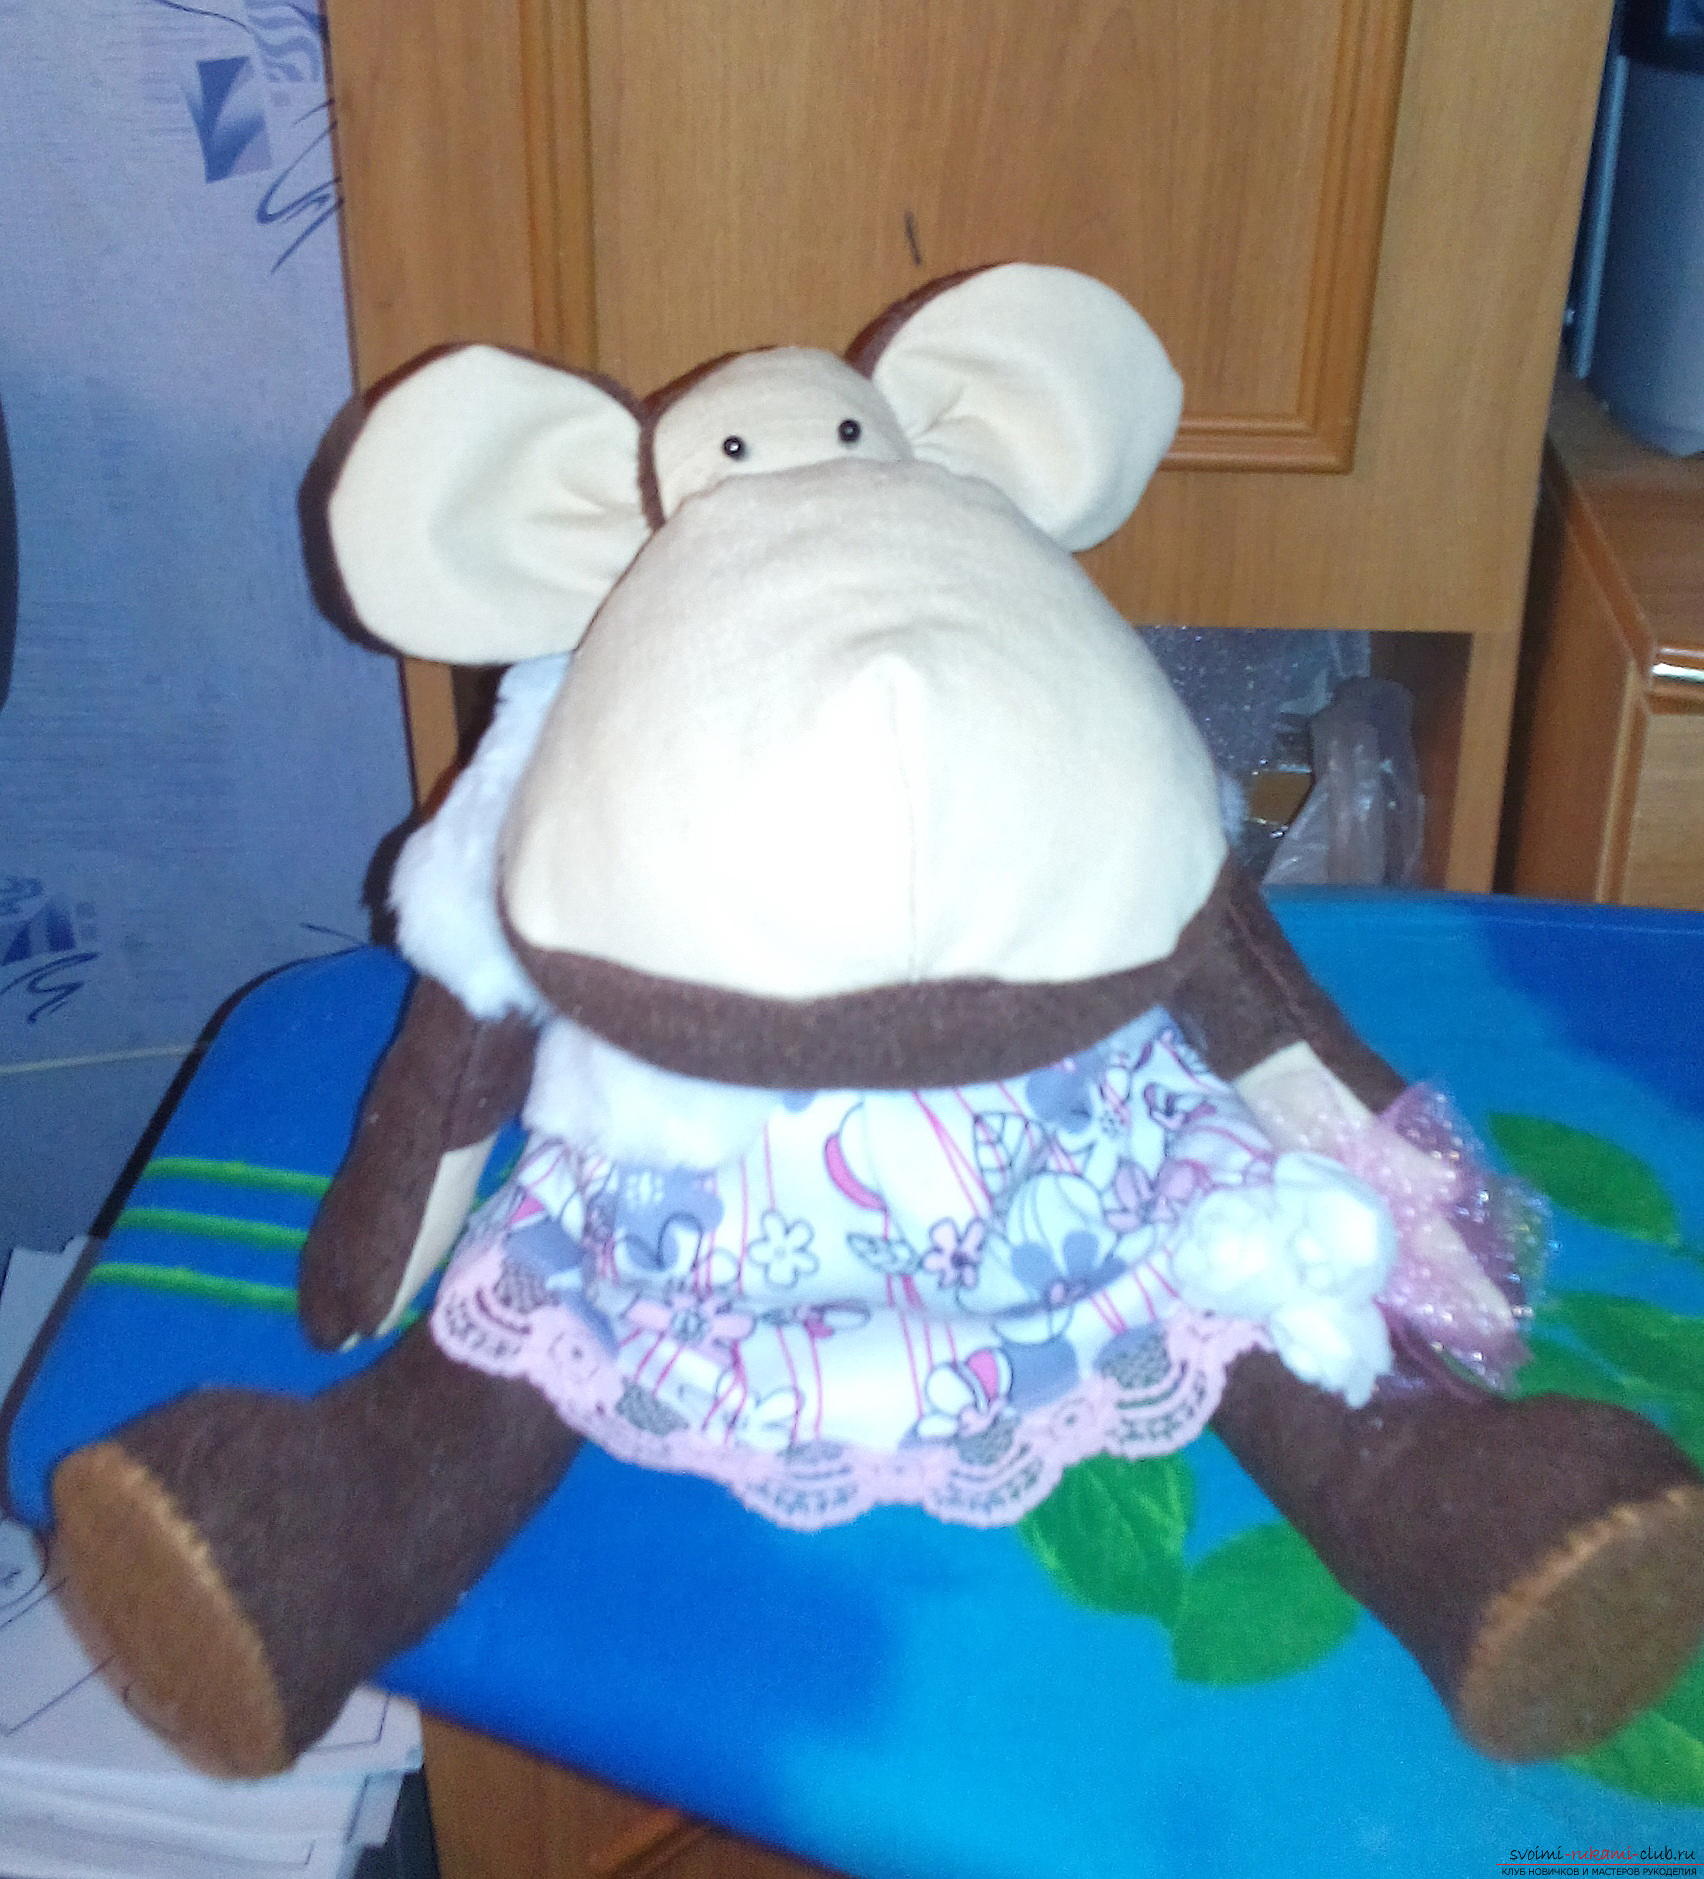 As a gift for the New Year 2016, I decided to sew a difficult monkey, and create a toy in the style of a tilde .. Photo # 1